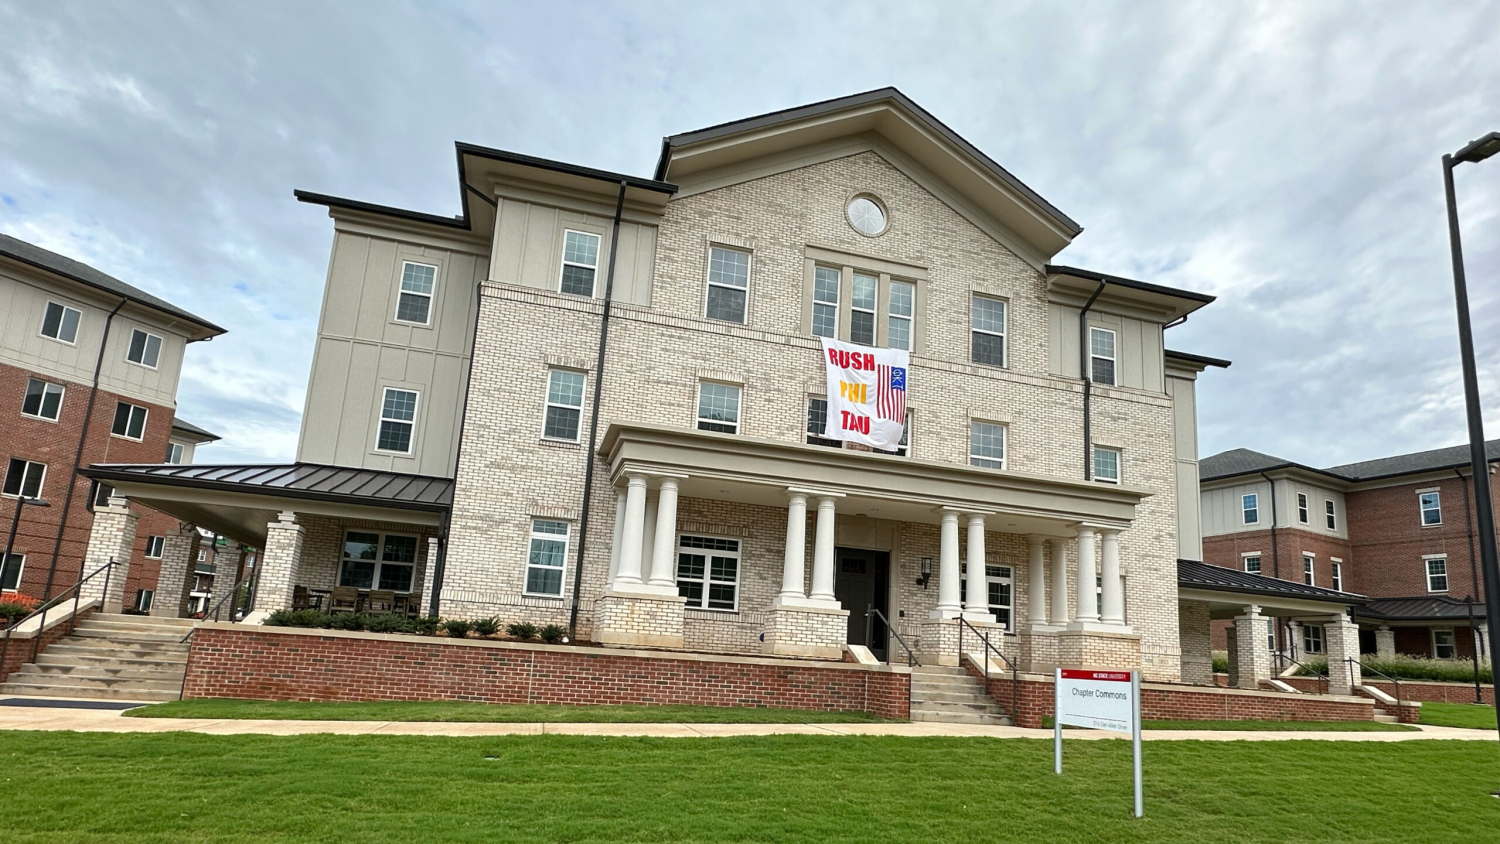 Chapter Commons is one of three new housing options recently completed in NC State's Greek Village.